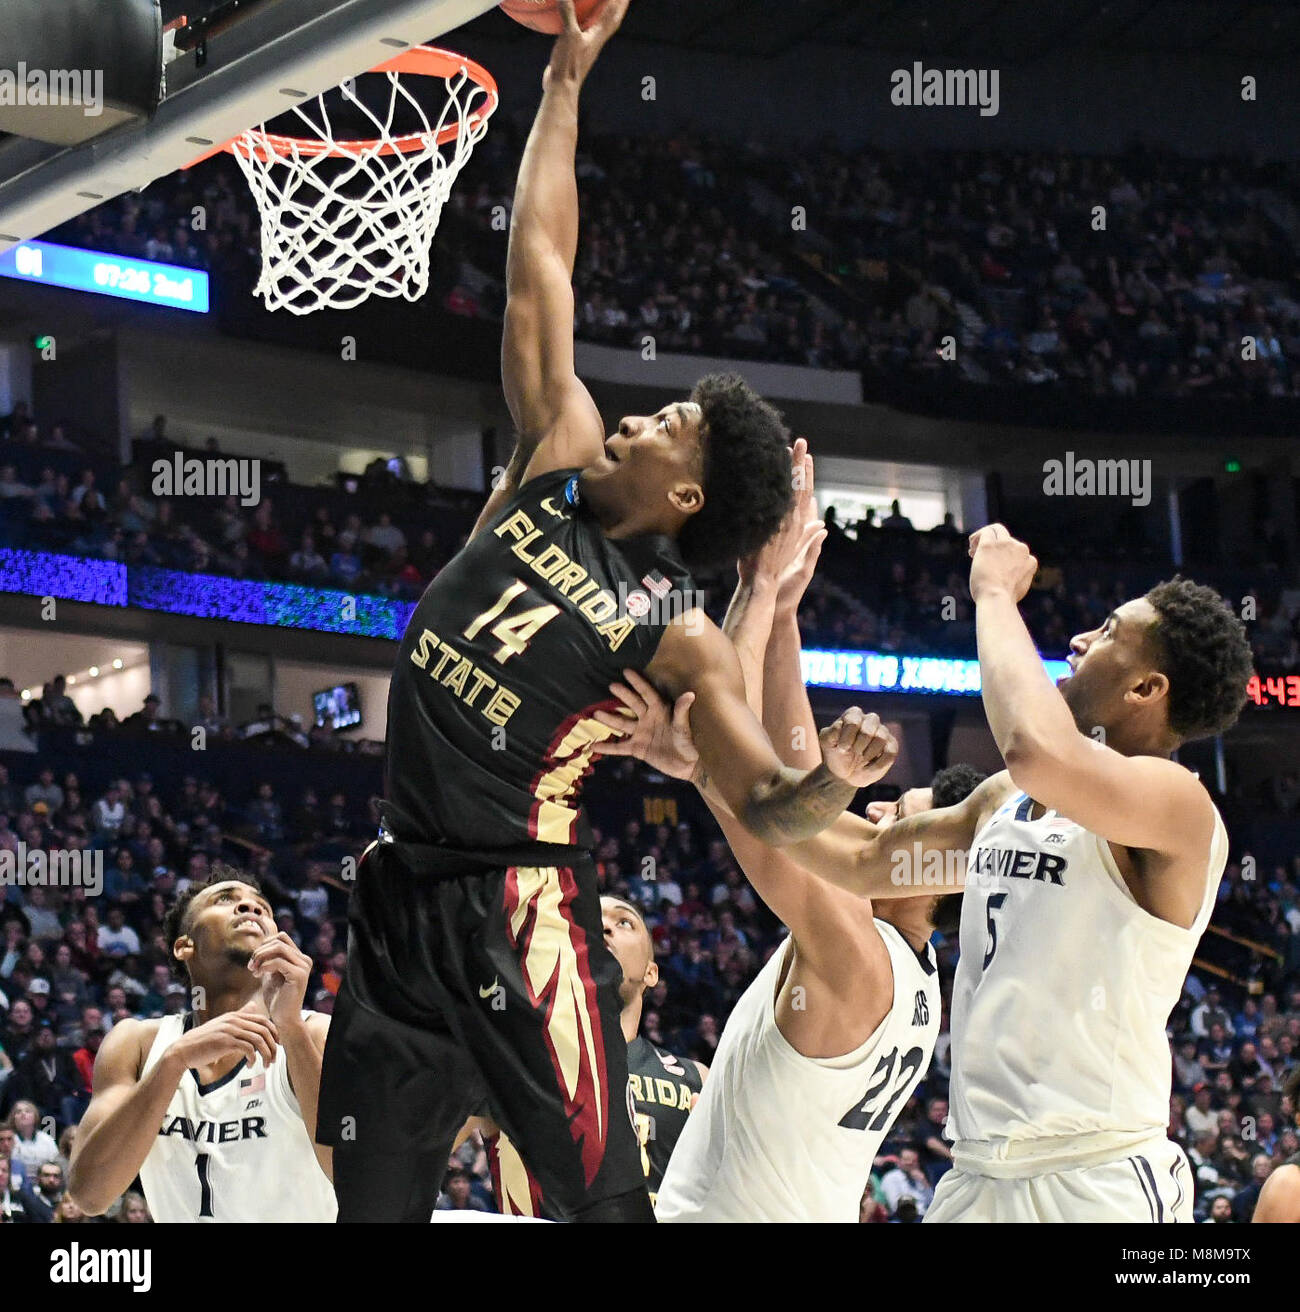 Nashville, Tennessee, USA. 18th Mar, 2018. Florida State Seminoles guard Terrance Mann (14) goes up for a shot during the game against the Xavier Musketeers at Bridgestone Arena on March 18, 2018 in Nashville, Tennessee. Credit: FGS Sports/Alamy Live News Stock Photo